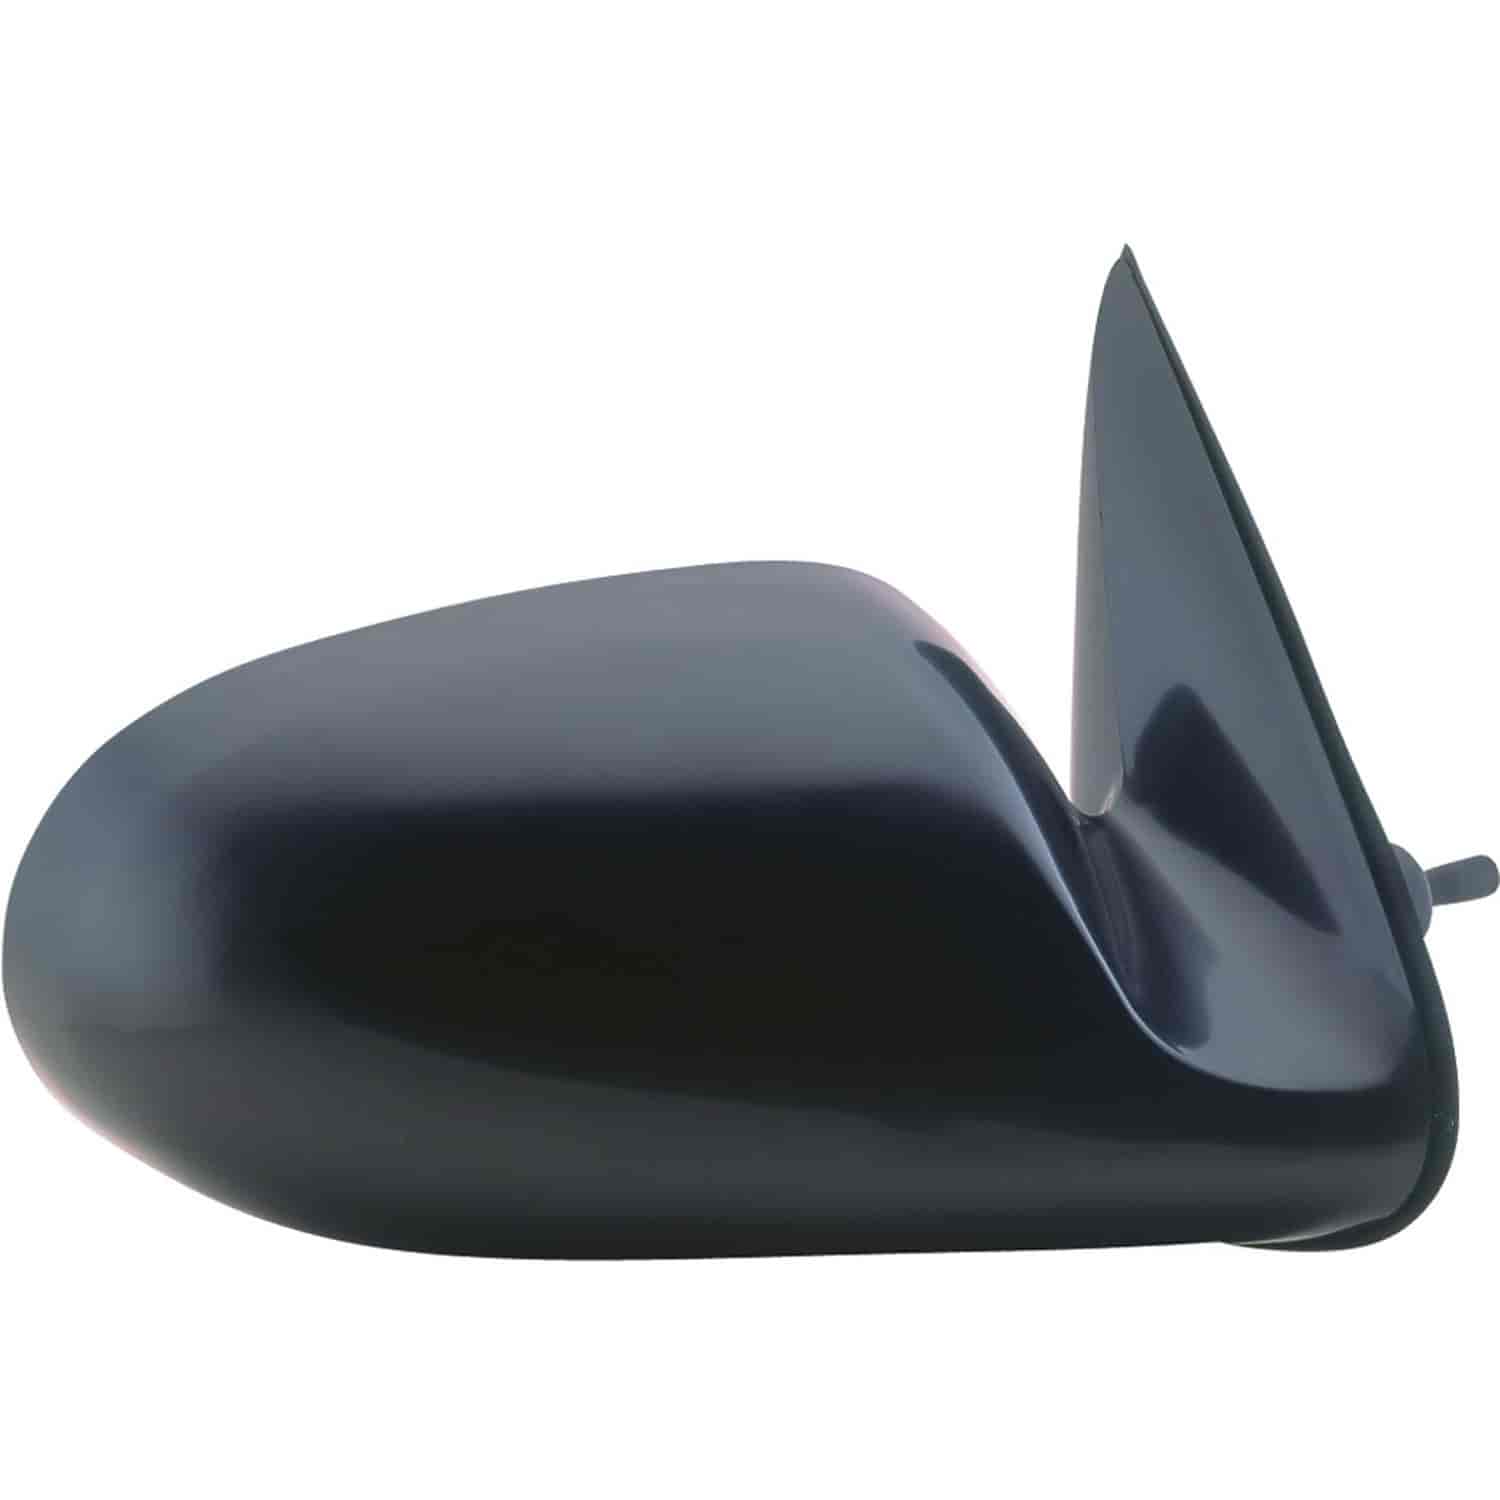 OEM Style Replacement mirror for 00-06 Nissan Sentra passenger side mirror tested to fit and functio